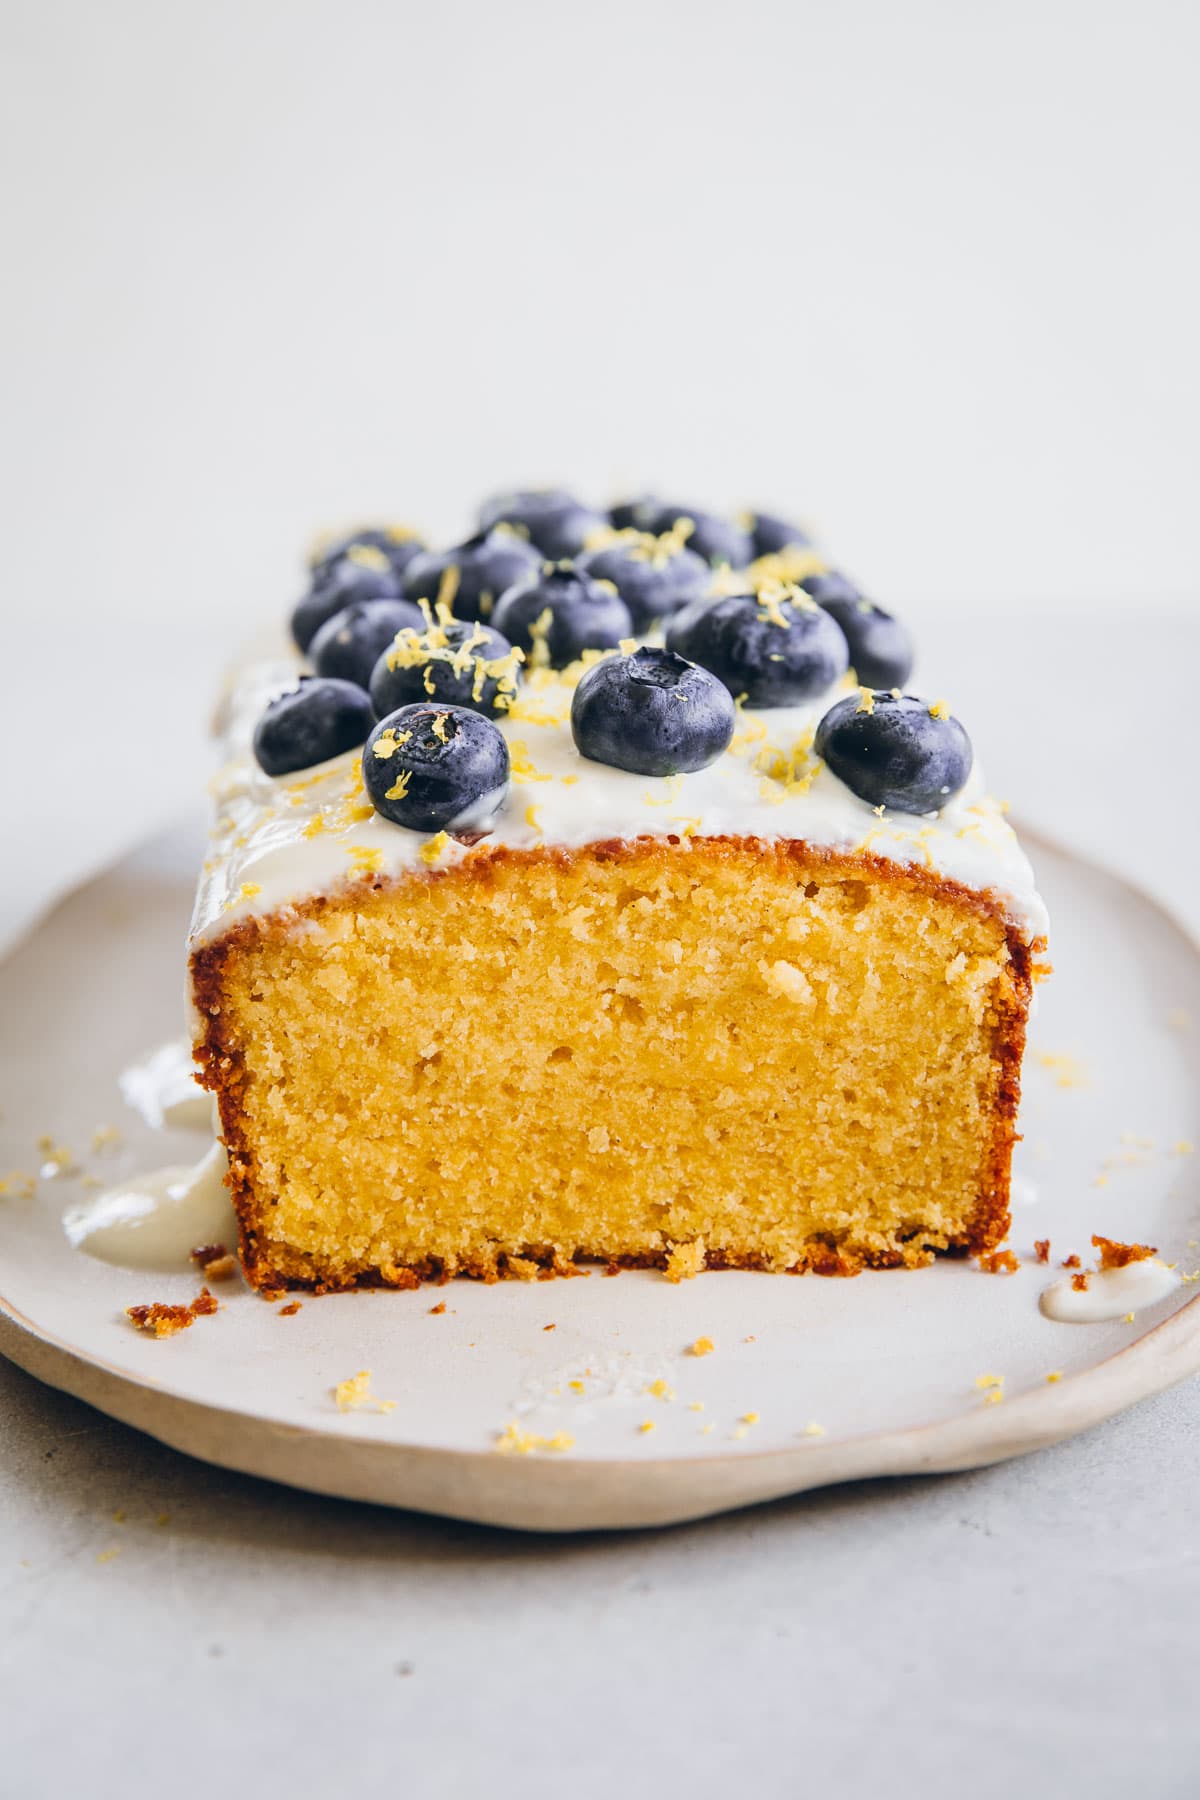 Blueberry Lemon Loaf Cake With Yoghurt Icing and fresh blueberries cut to reveal the yellow crumb.